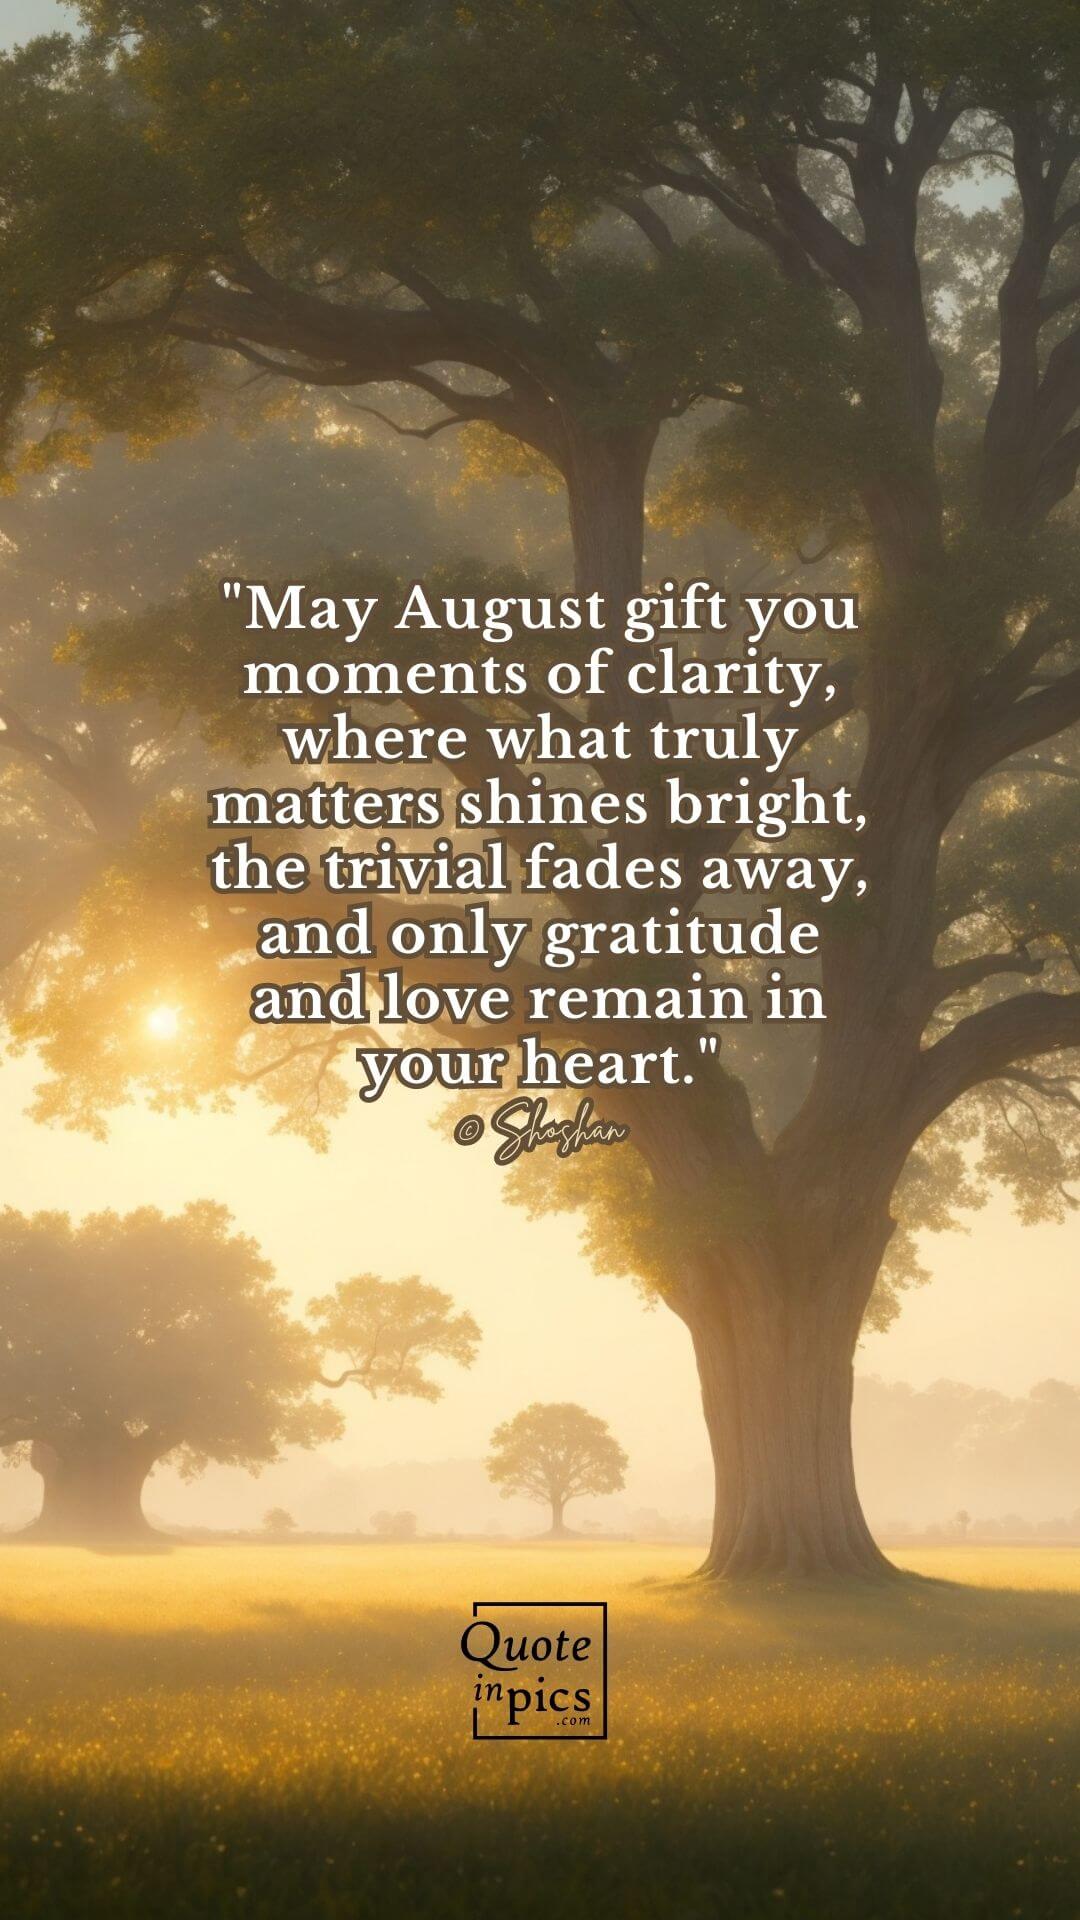 May August gift you moments of clarity, where what truly matters shines bright, the trivial fades away, and only gratitude and love remain in your heart.